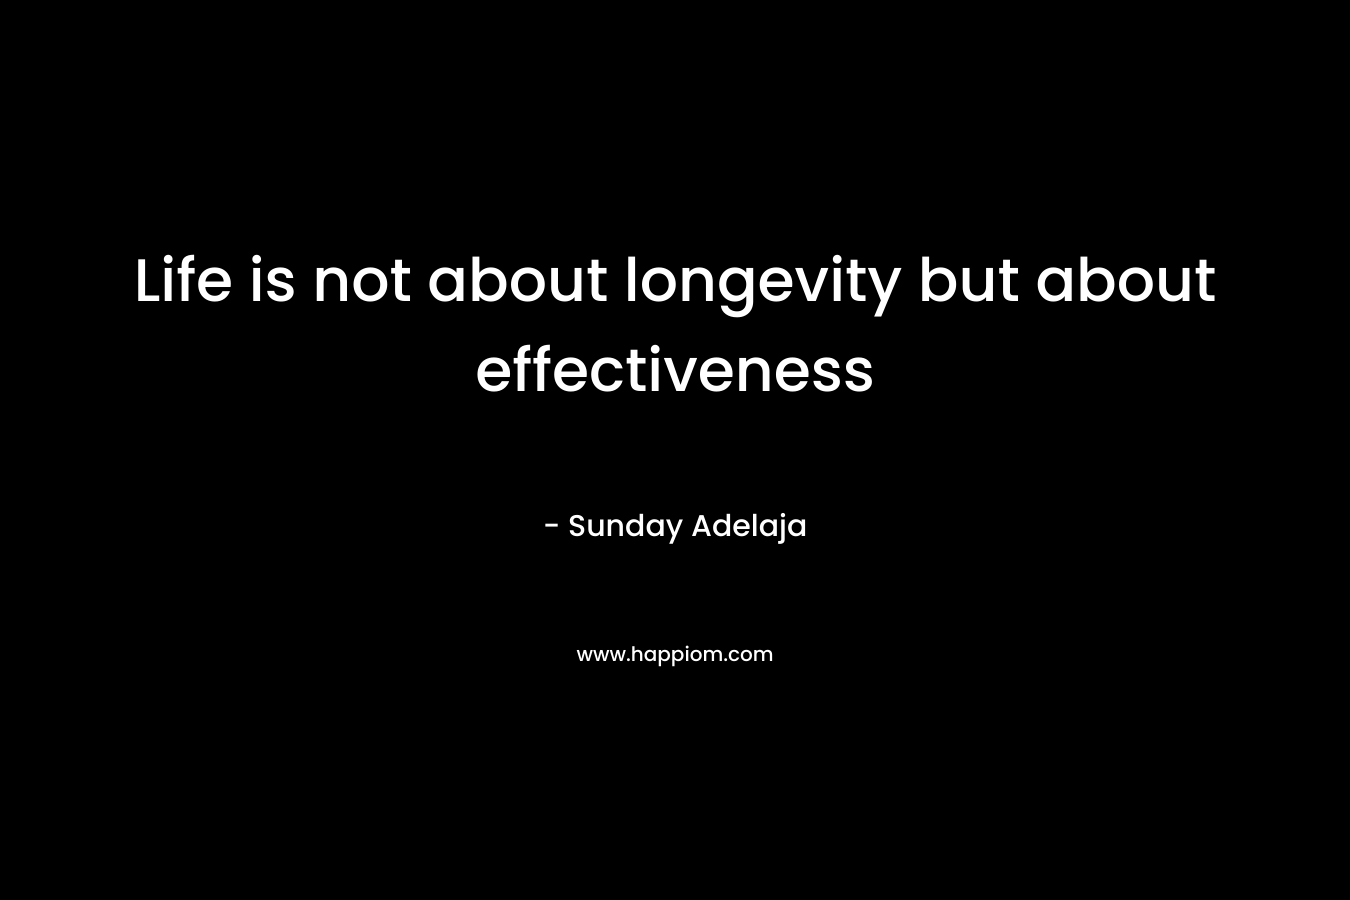 Life is not about longevity but about effectiveness